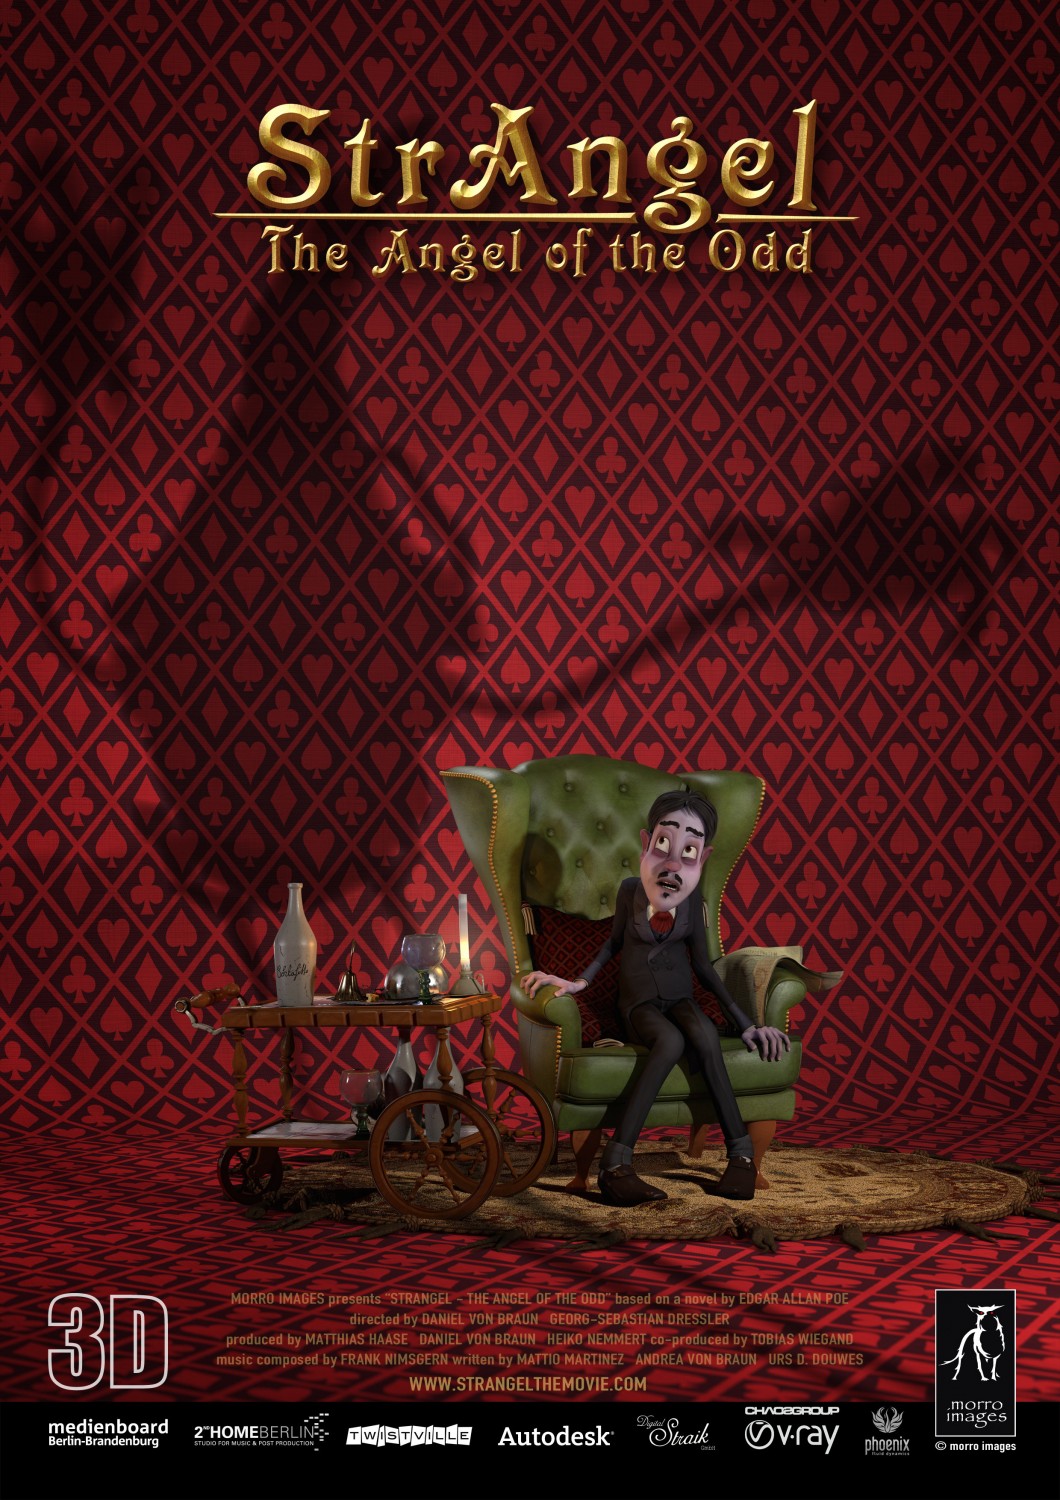 Extra Large Movie Poster Image for StrAngel: The Angel of the Odd